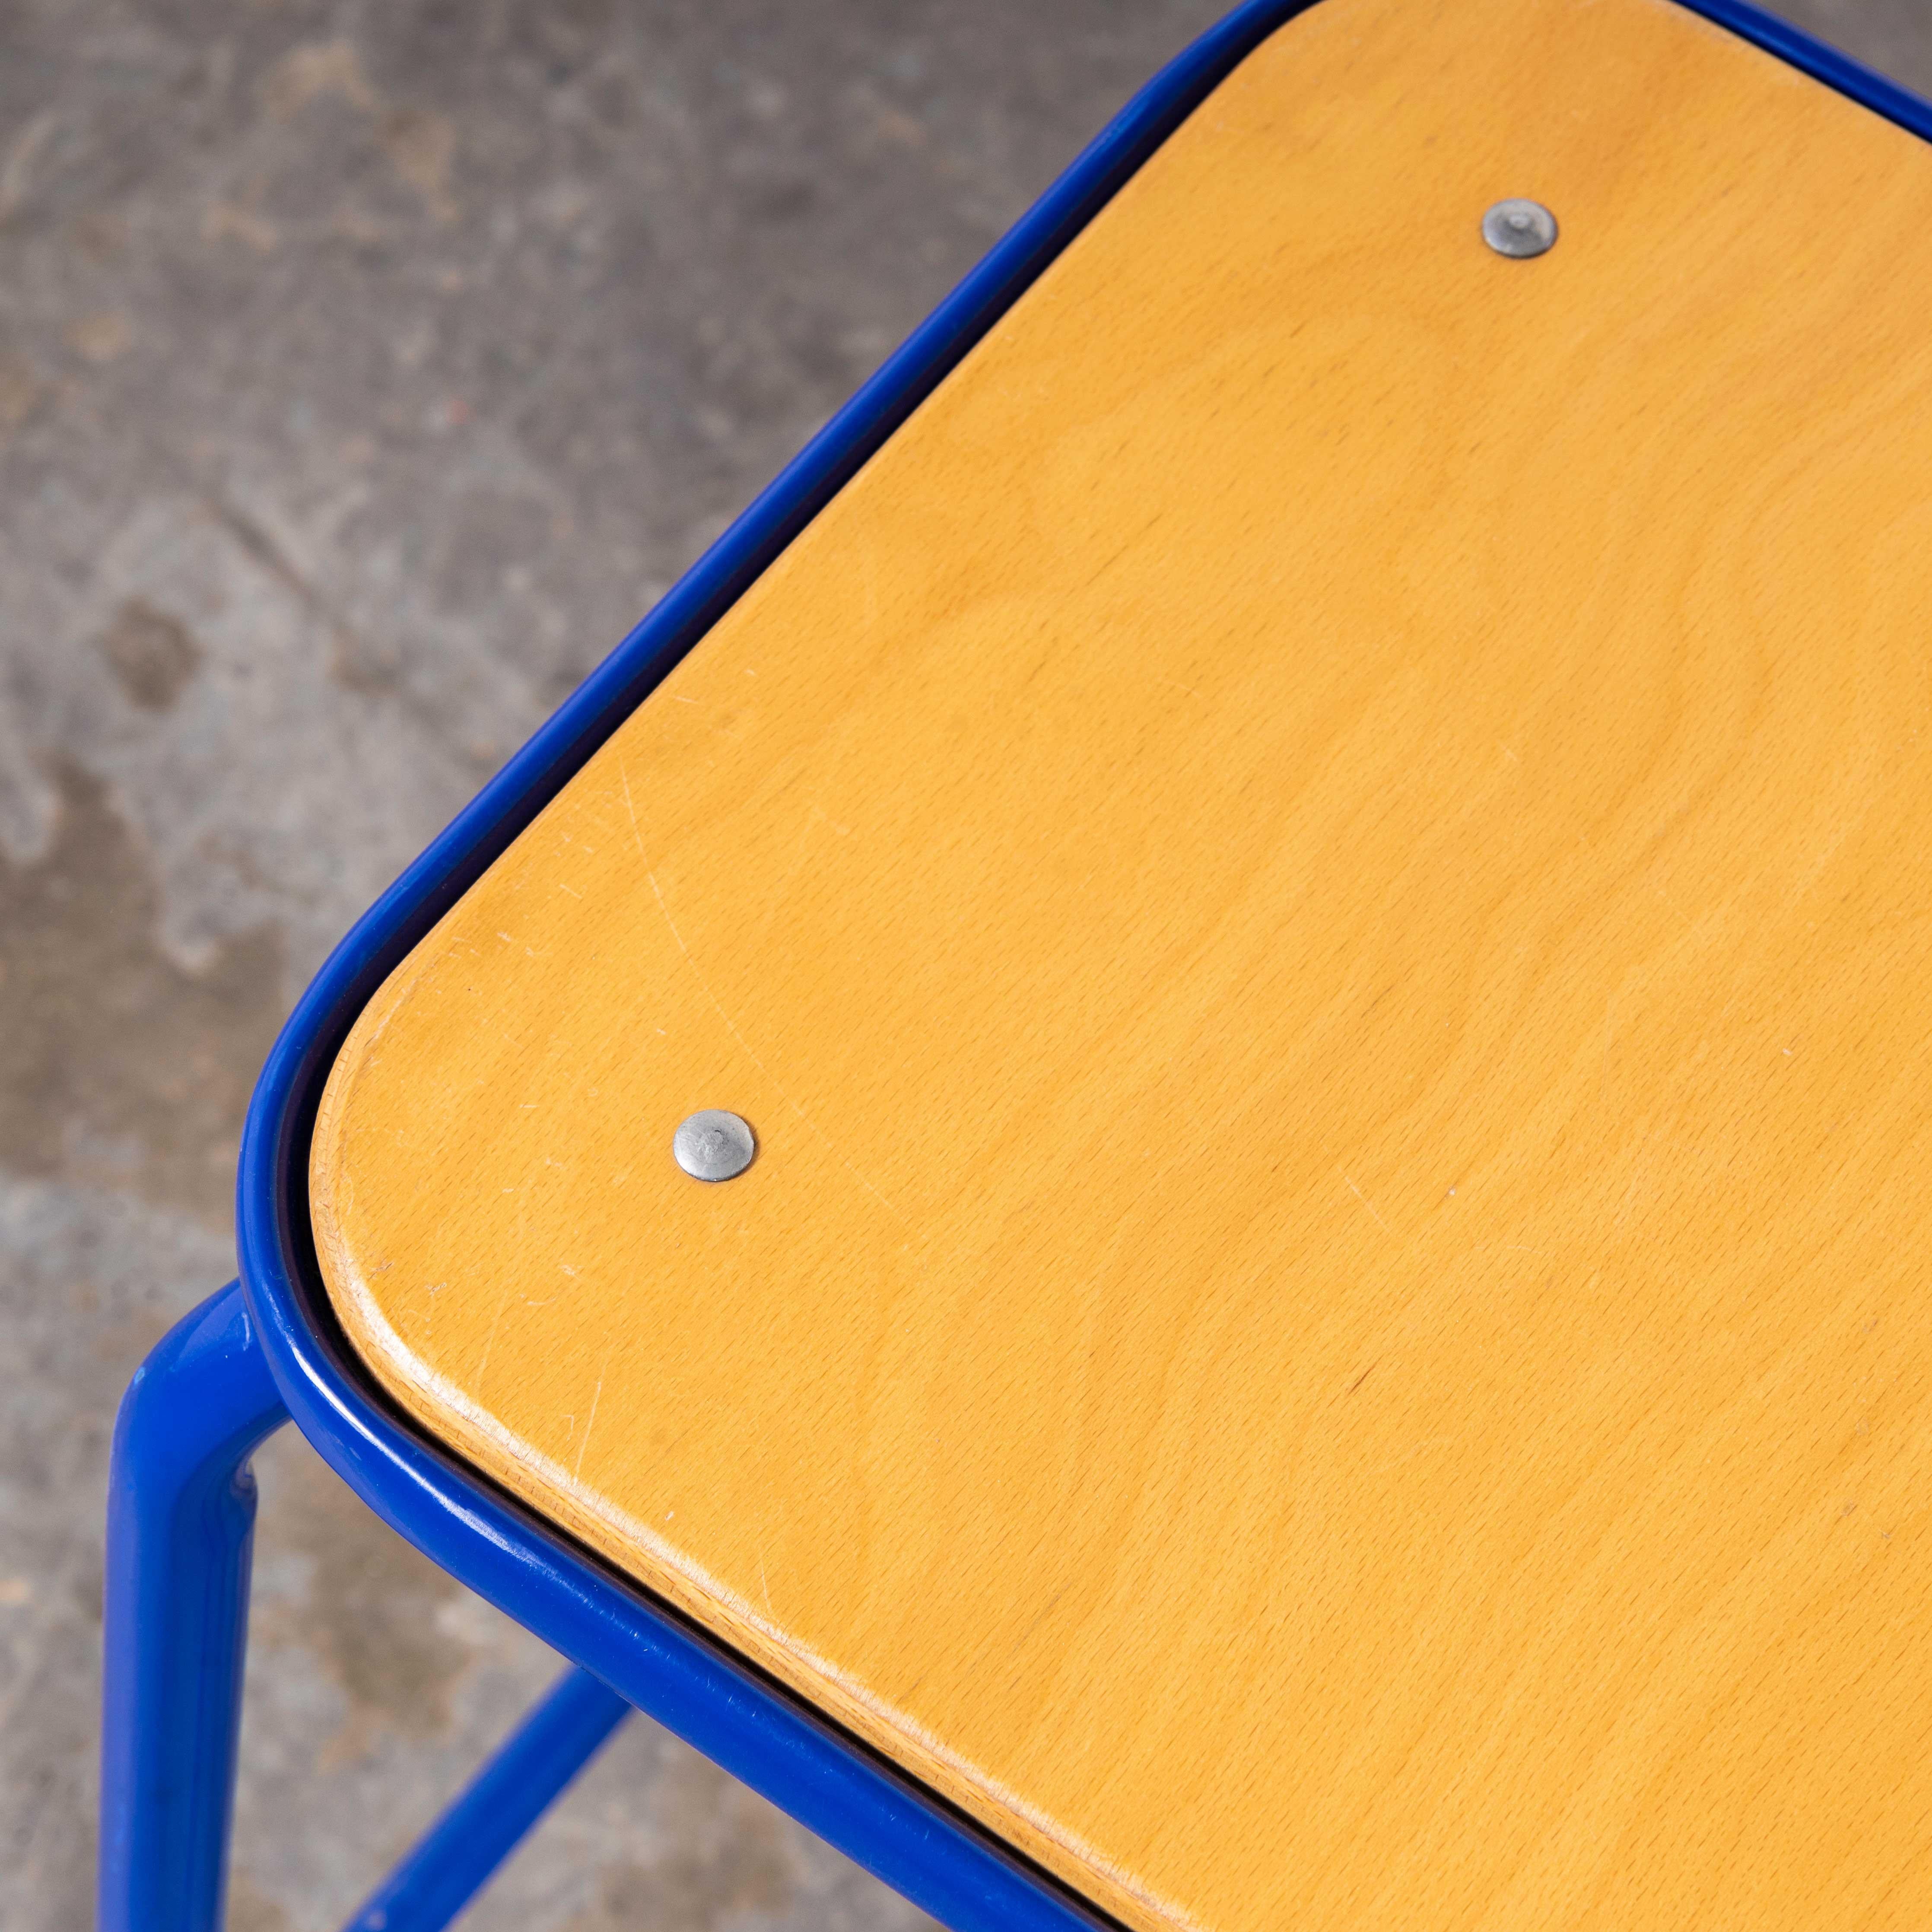 1970’s French Bright Blue Laboratory Stools – Quantity Available
1970’s French Bright Blue Laboratory Stools – Quantity Available. Good honest lab stools, heavy steel frames with solid heavy birch ply seats. We clean them and check all fixings, they